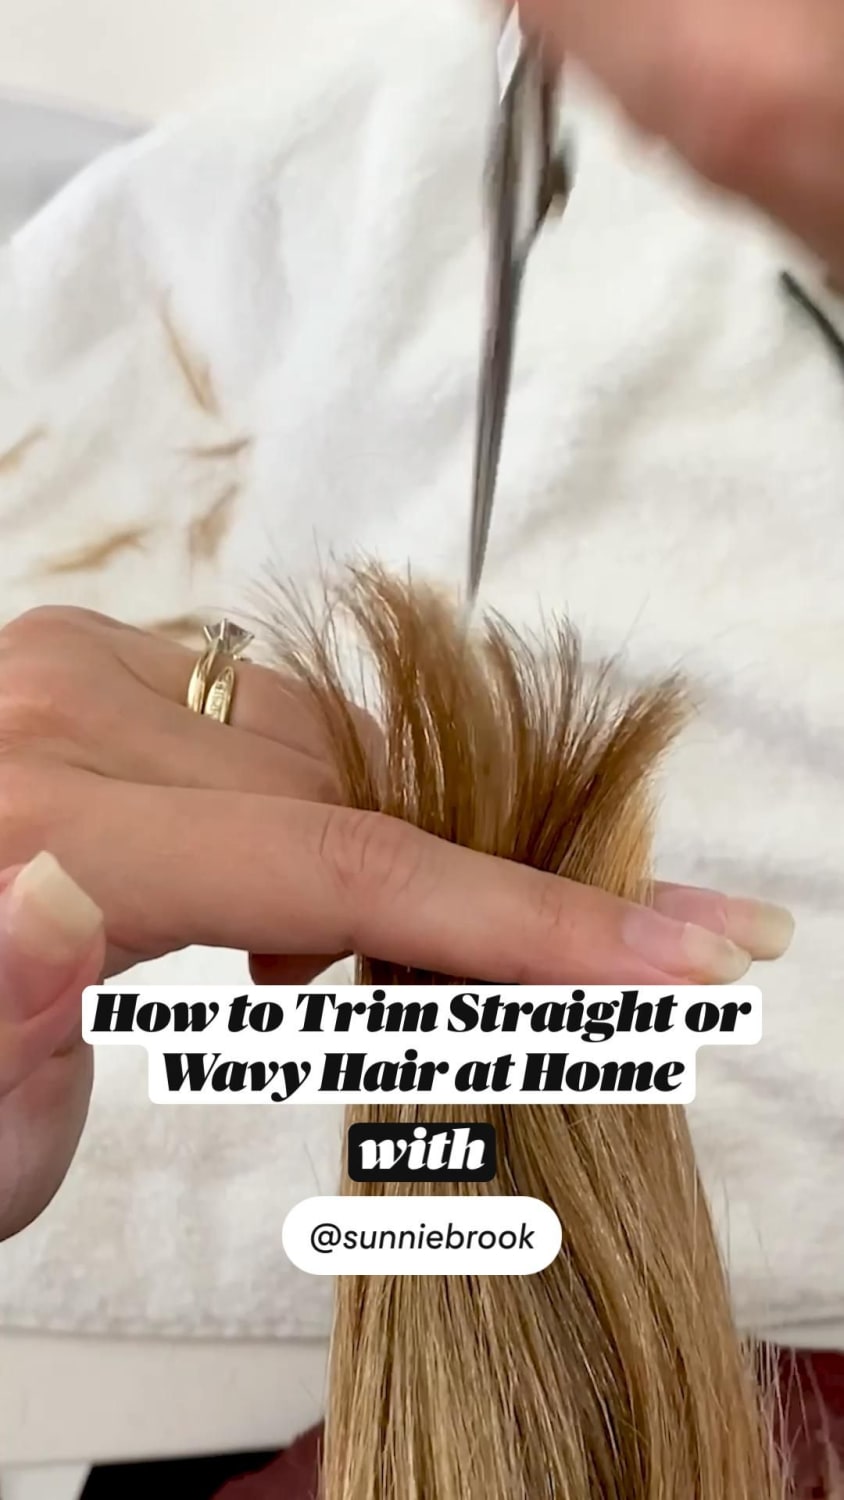 How to Trim Straight or Wavy Hair at Home